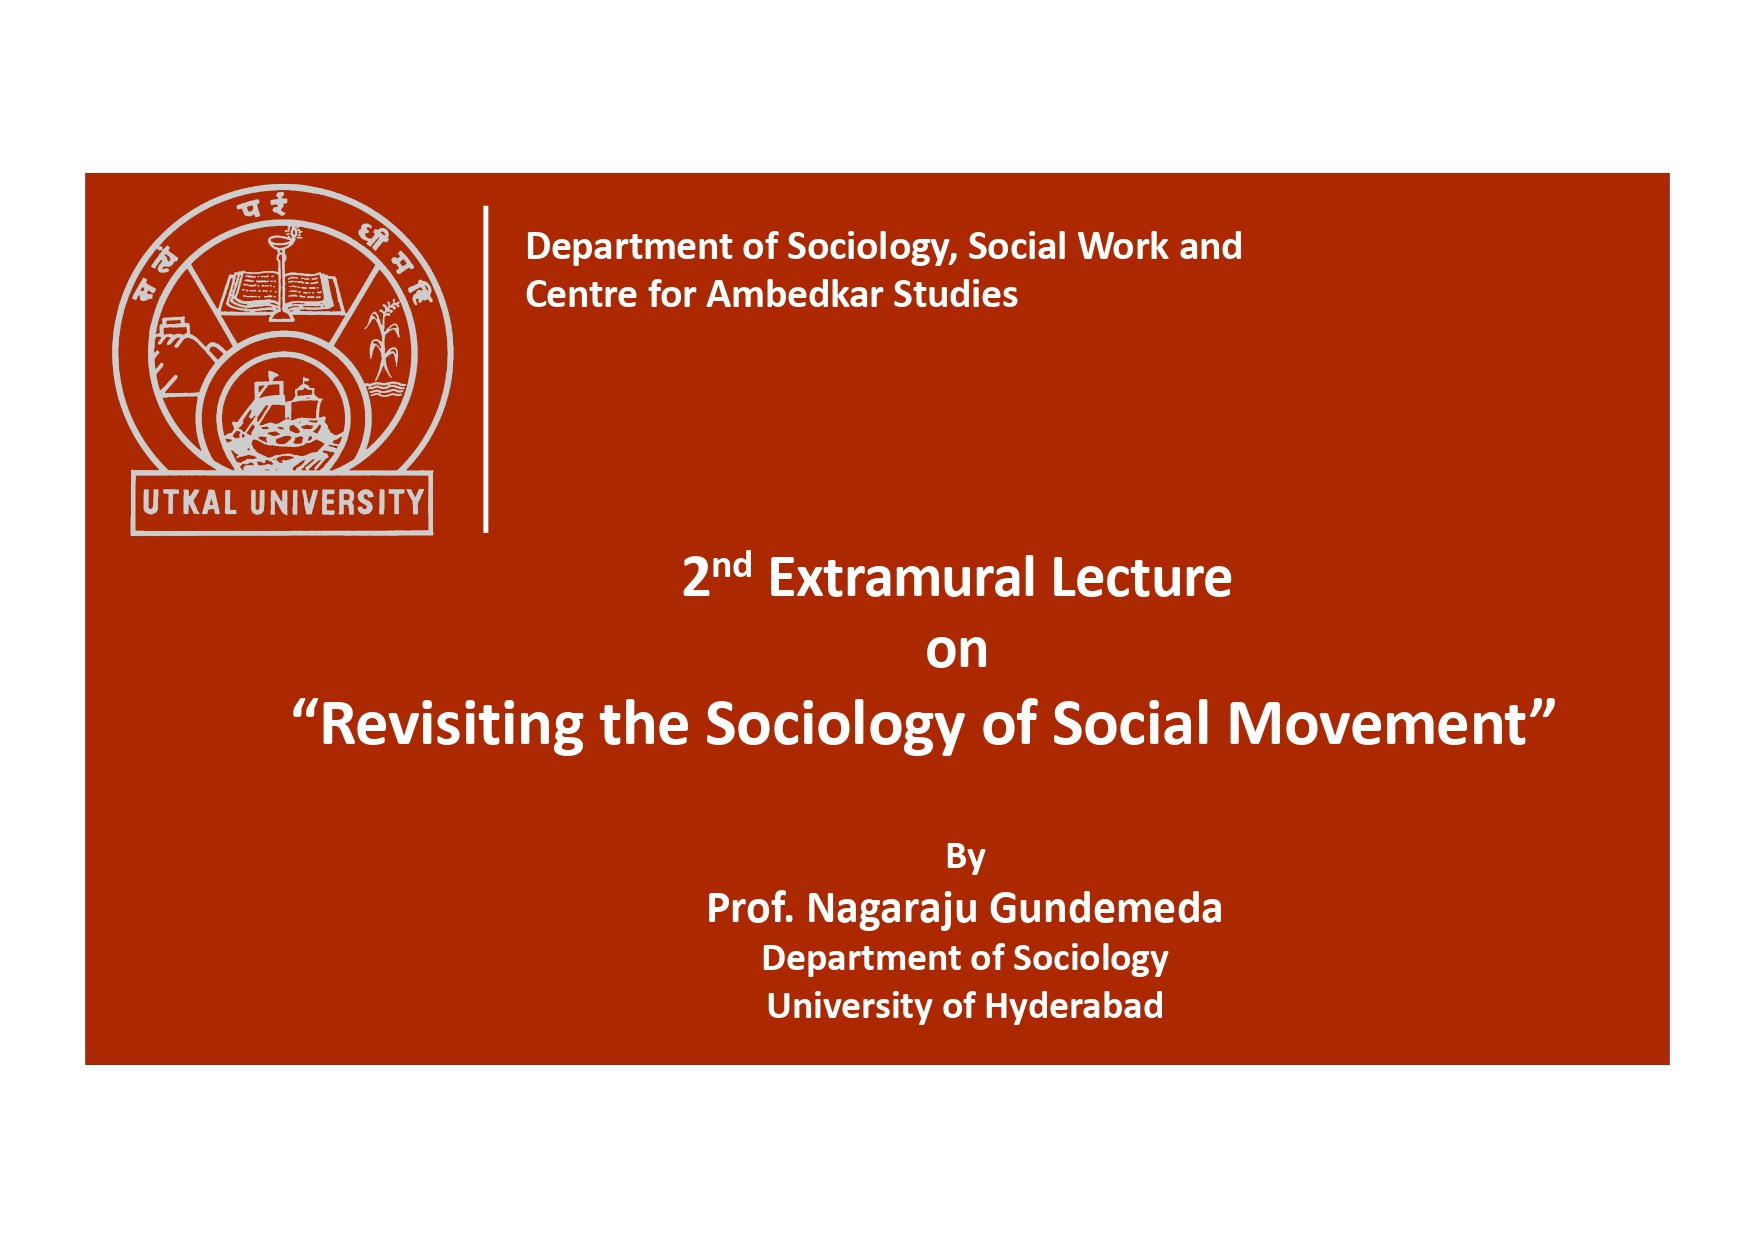 2nd Extramural Lecture on “Revisiting the Sociology of Social Movement” by Prof. Nagaraju Gundemeda